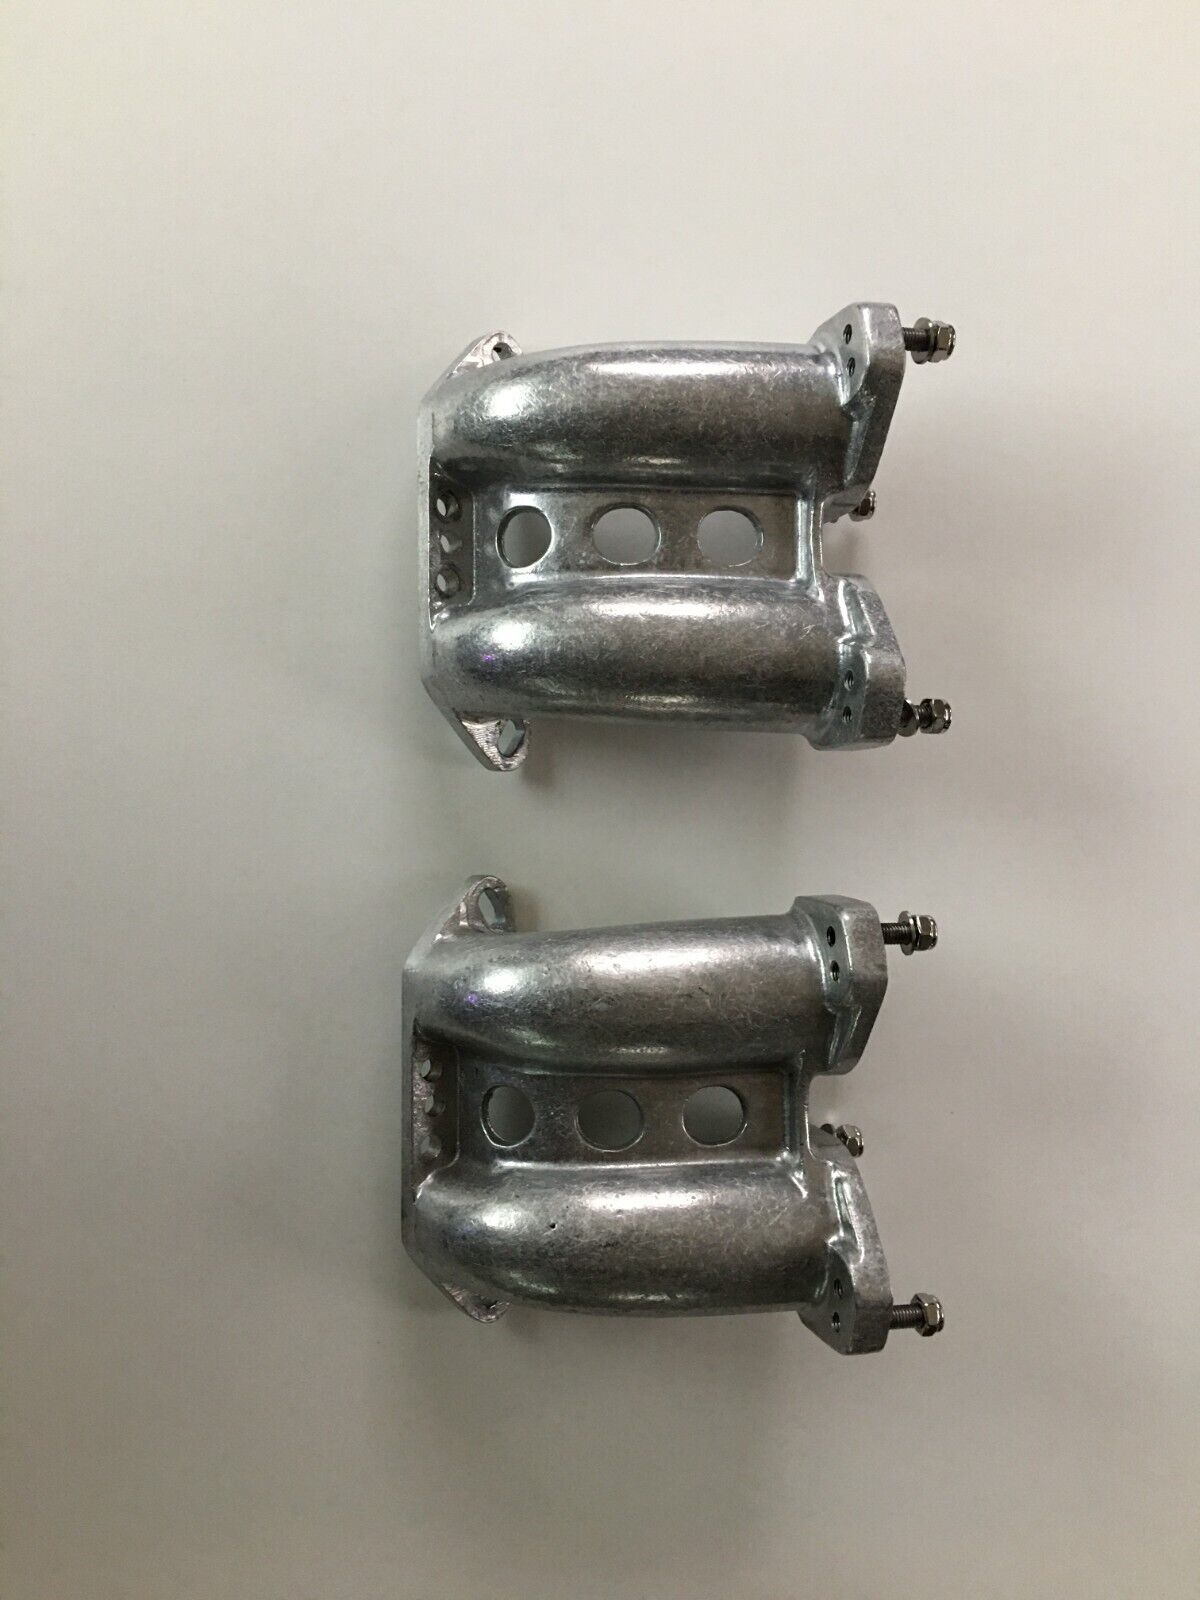 vw type 4 or porsche 914 intake manifolds for dual 40 or 44 idf carbs